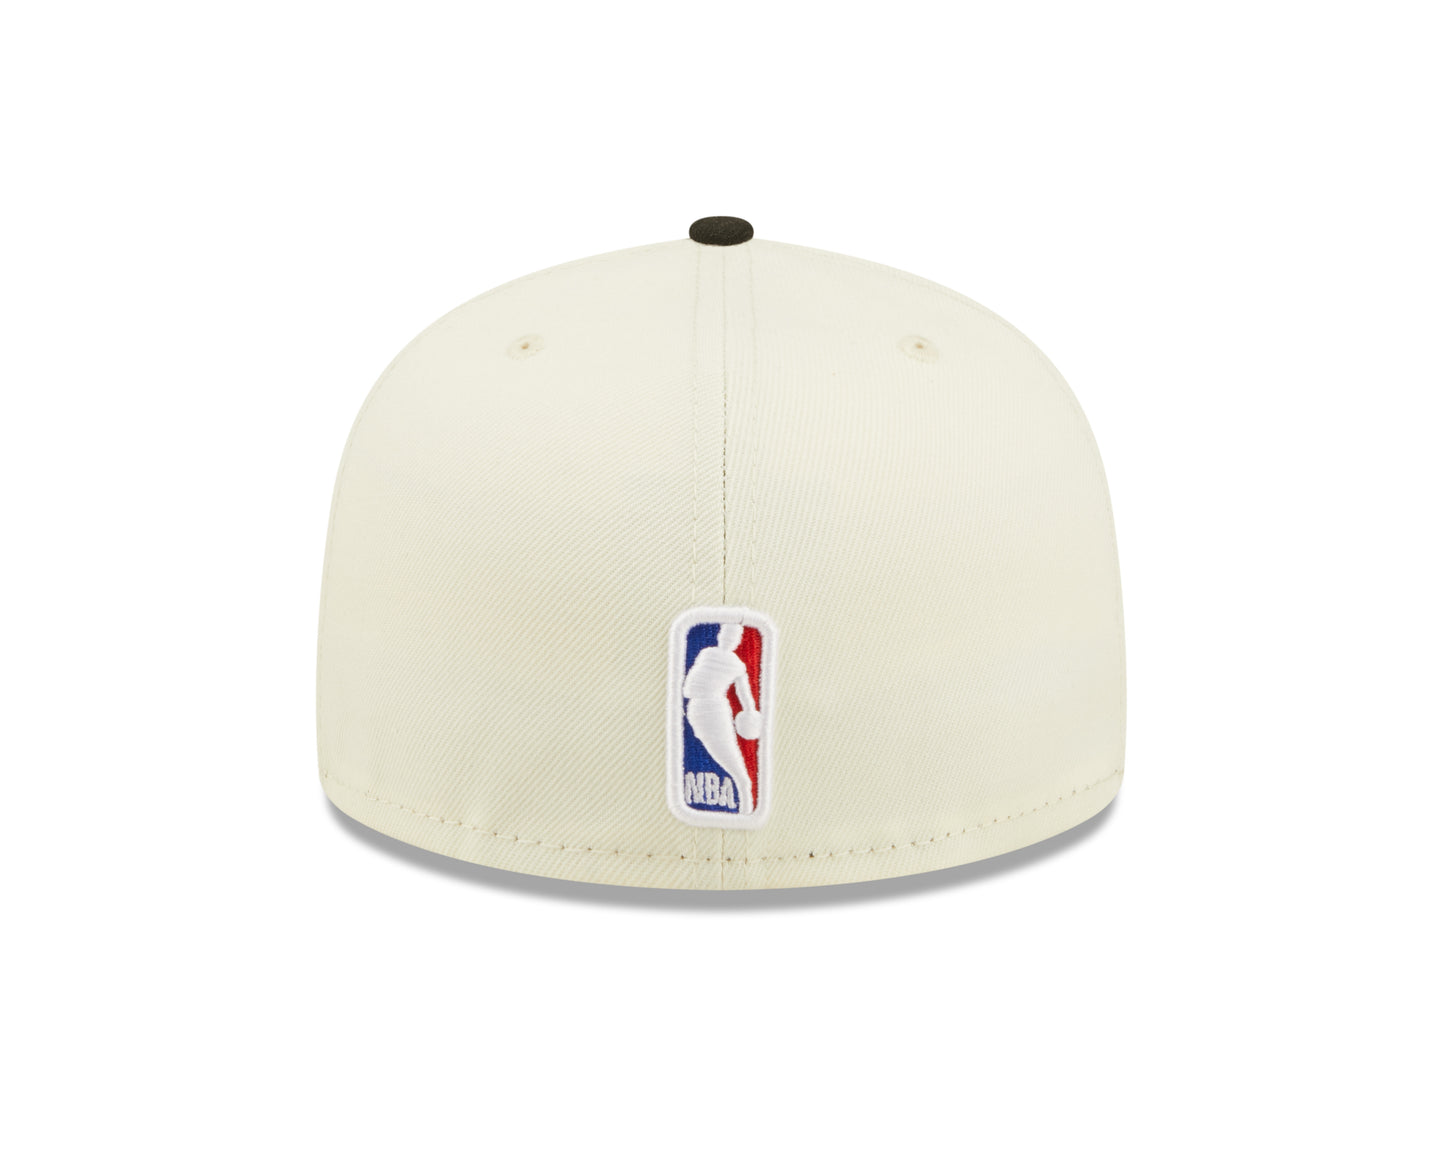 San Antonio Spurs New Era  NBA On Stage Draft 59fifty Fitted Hat- Cream